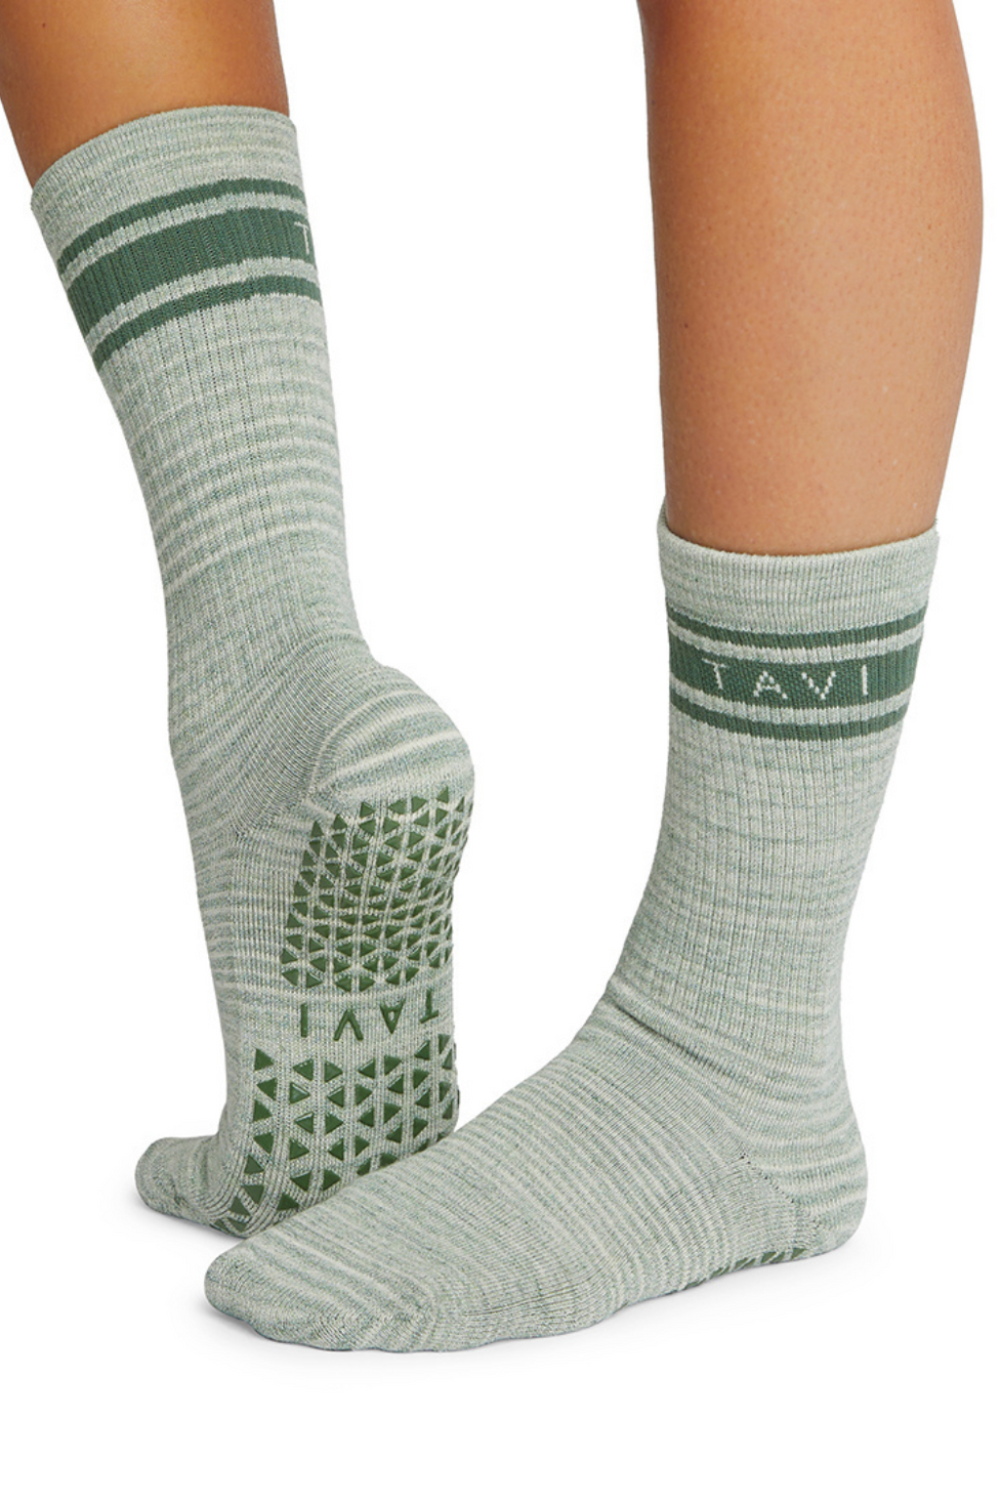 High density green rubber grip activewear socks for yoga, pilates, gym, and exercise from Tavi Grip featured by sustainable women's activewear brand Jilla Active